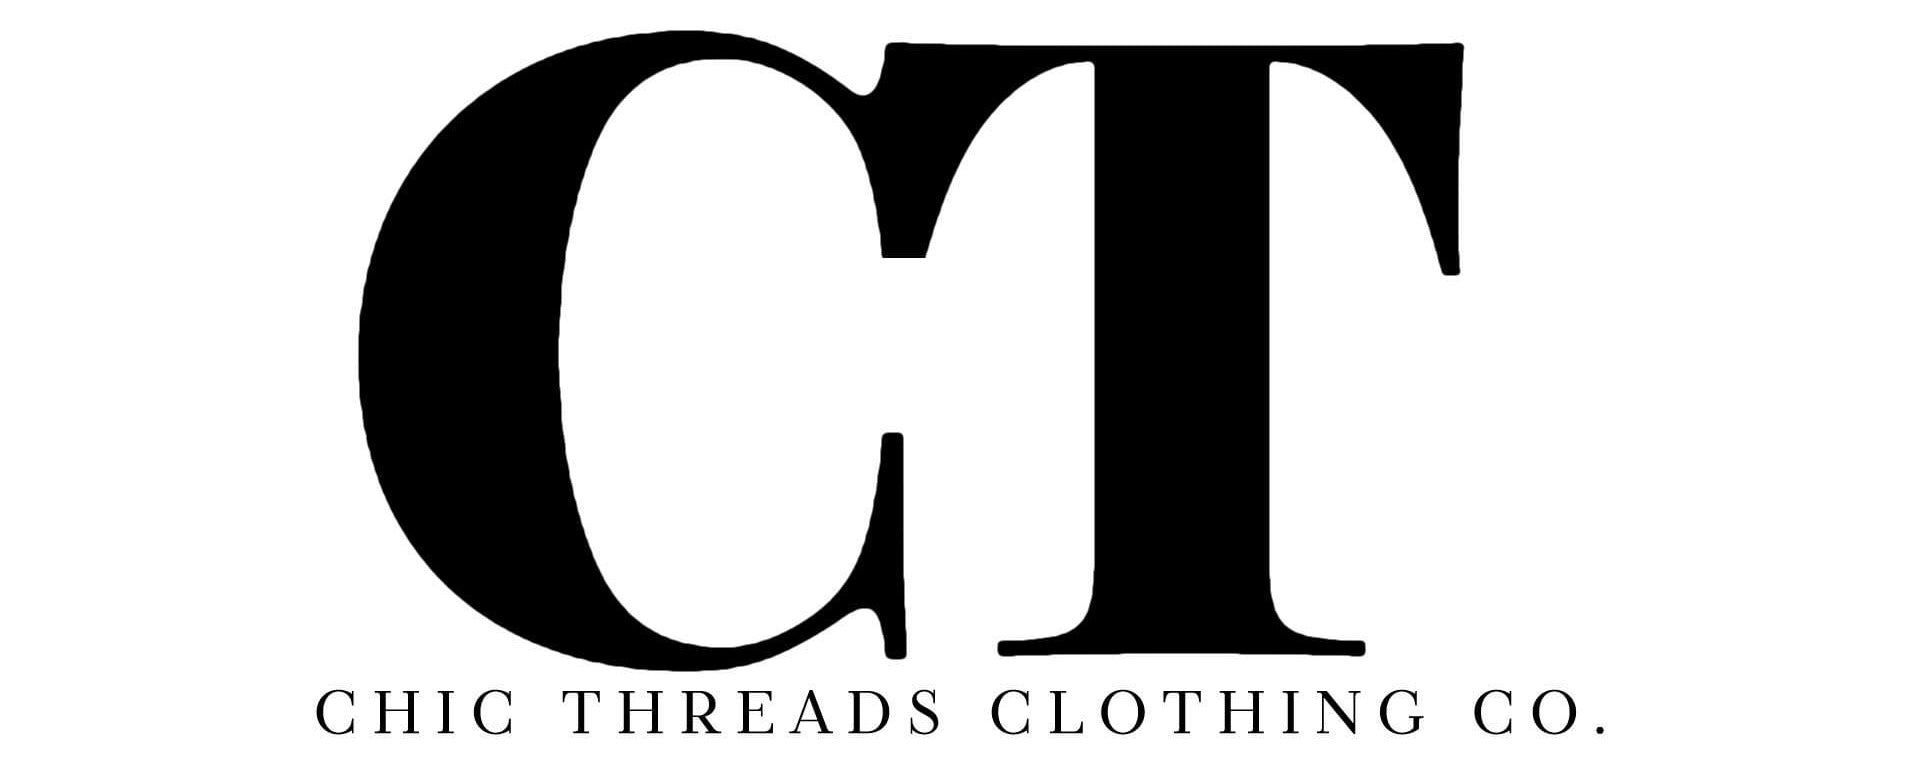 Chic Threads – Chic Threads Clothing Co.